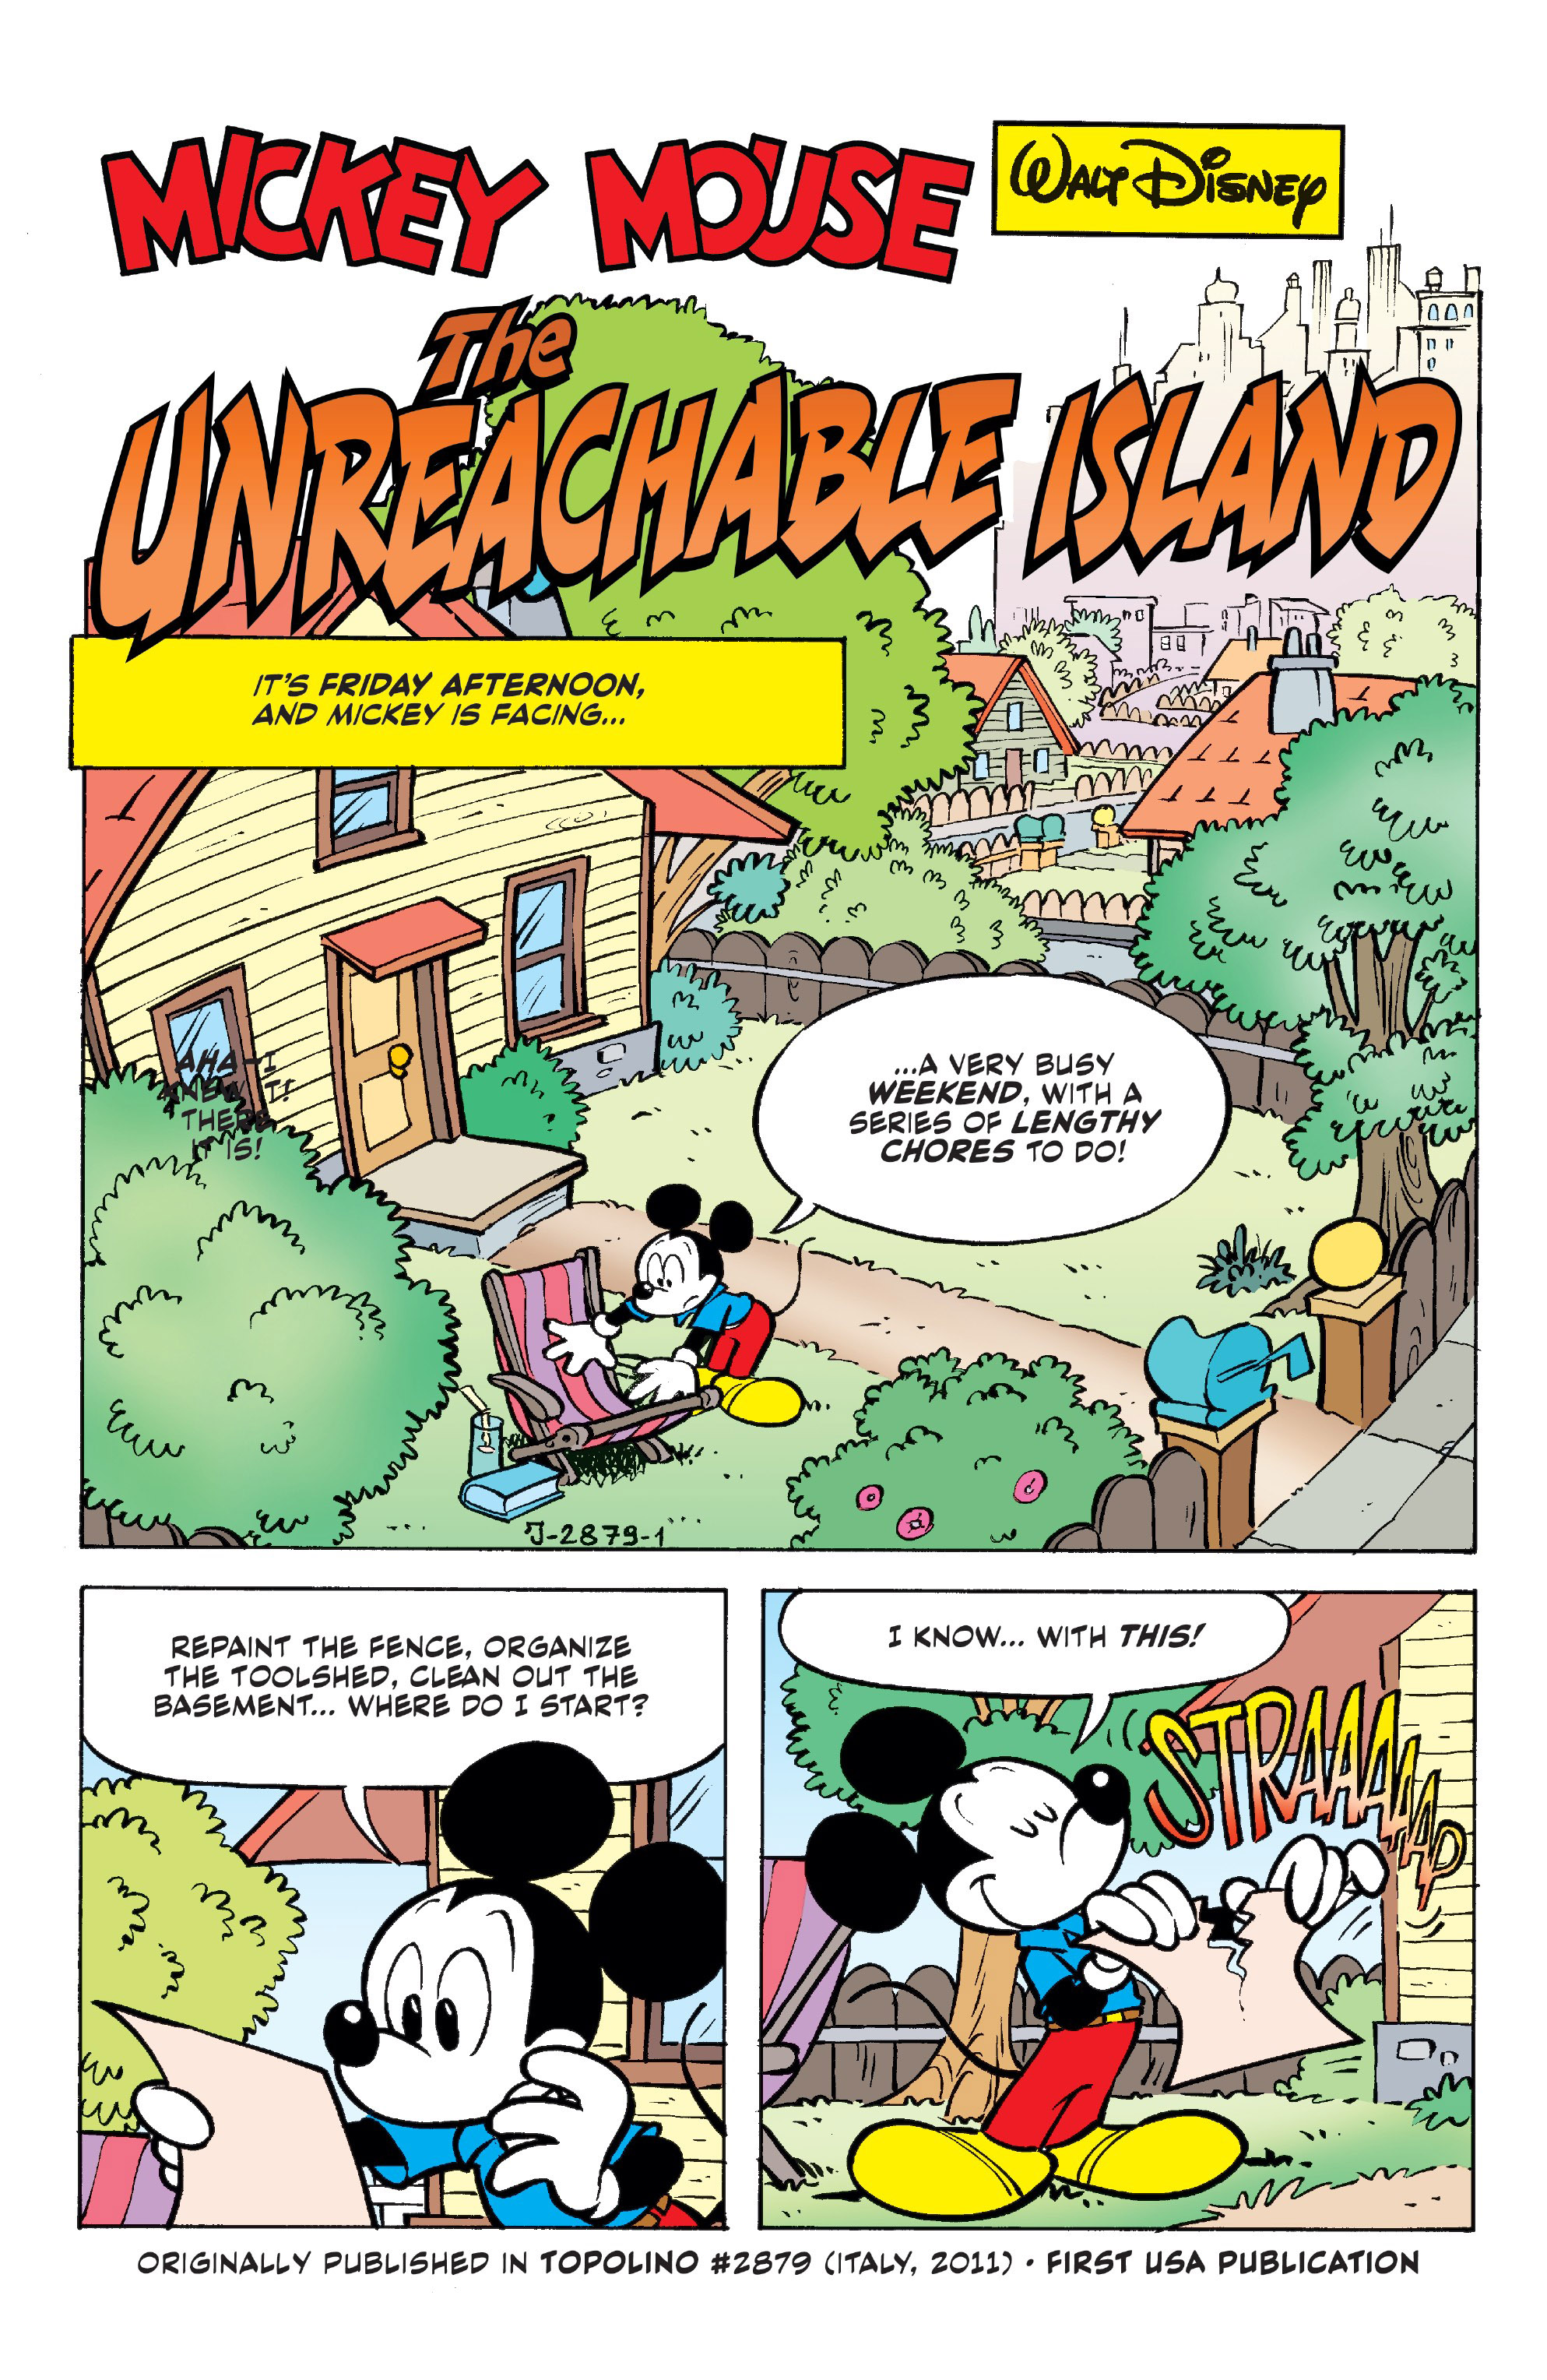 Disney Comics and Stories (2018-): Chapter 4 - Page 3